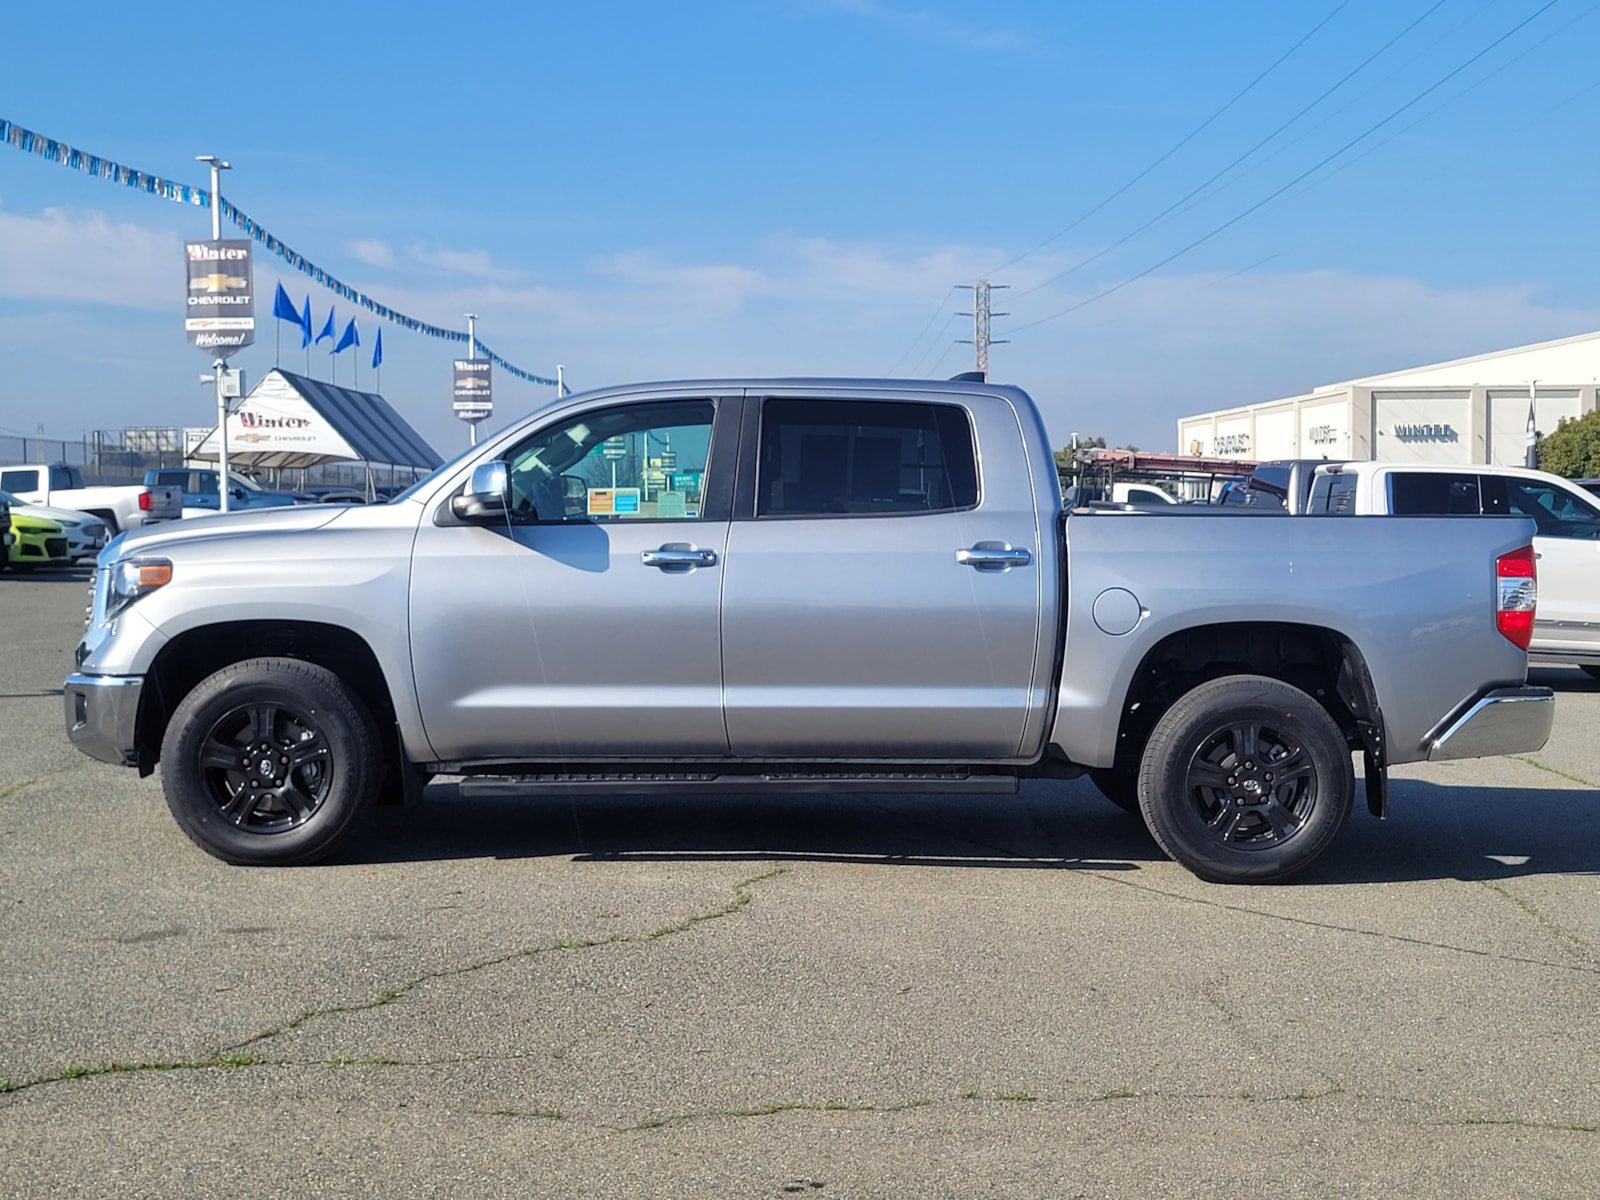 Used 2021 Toyota Tundra For Sale at Winter Honda | VIN 